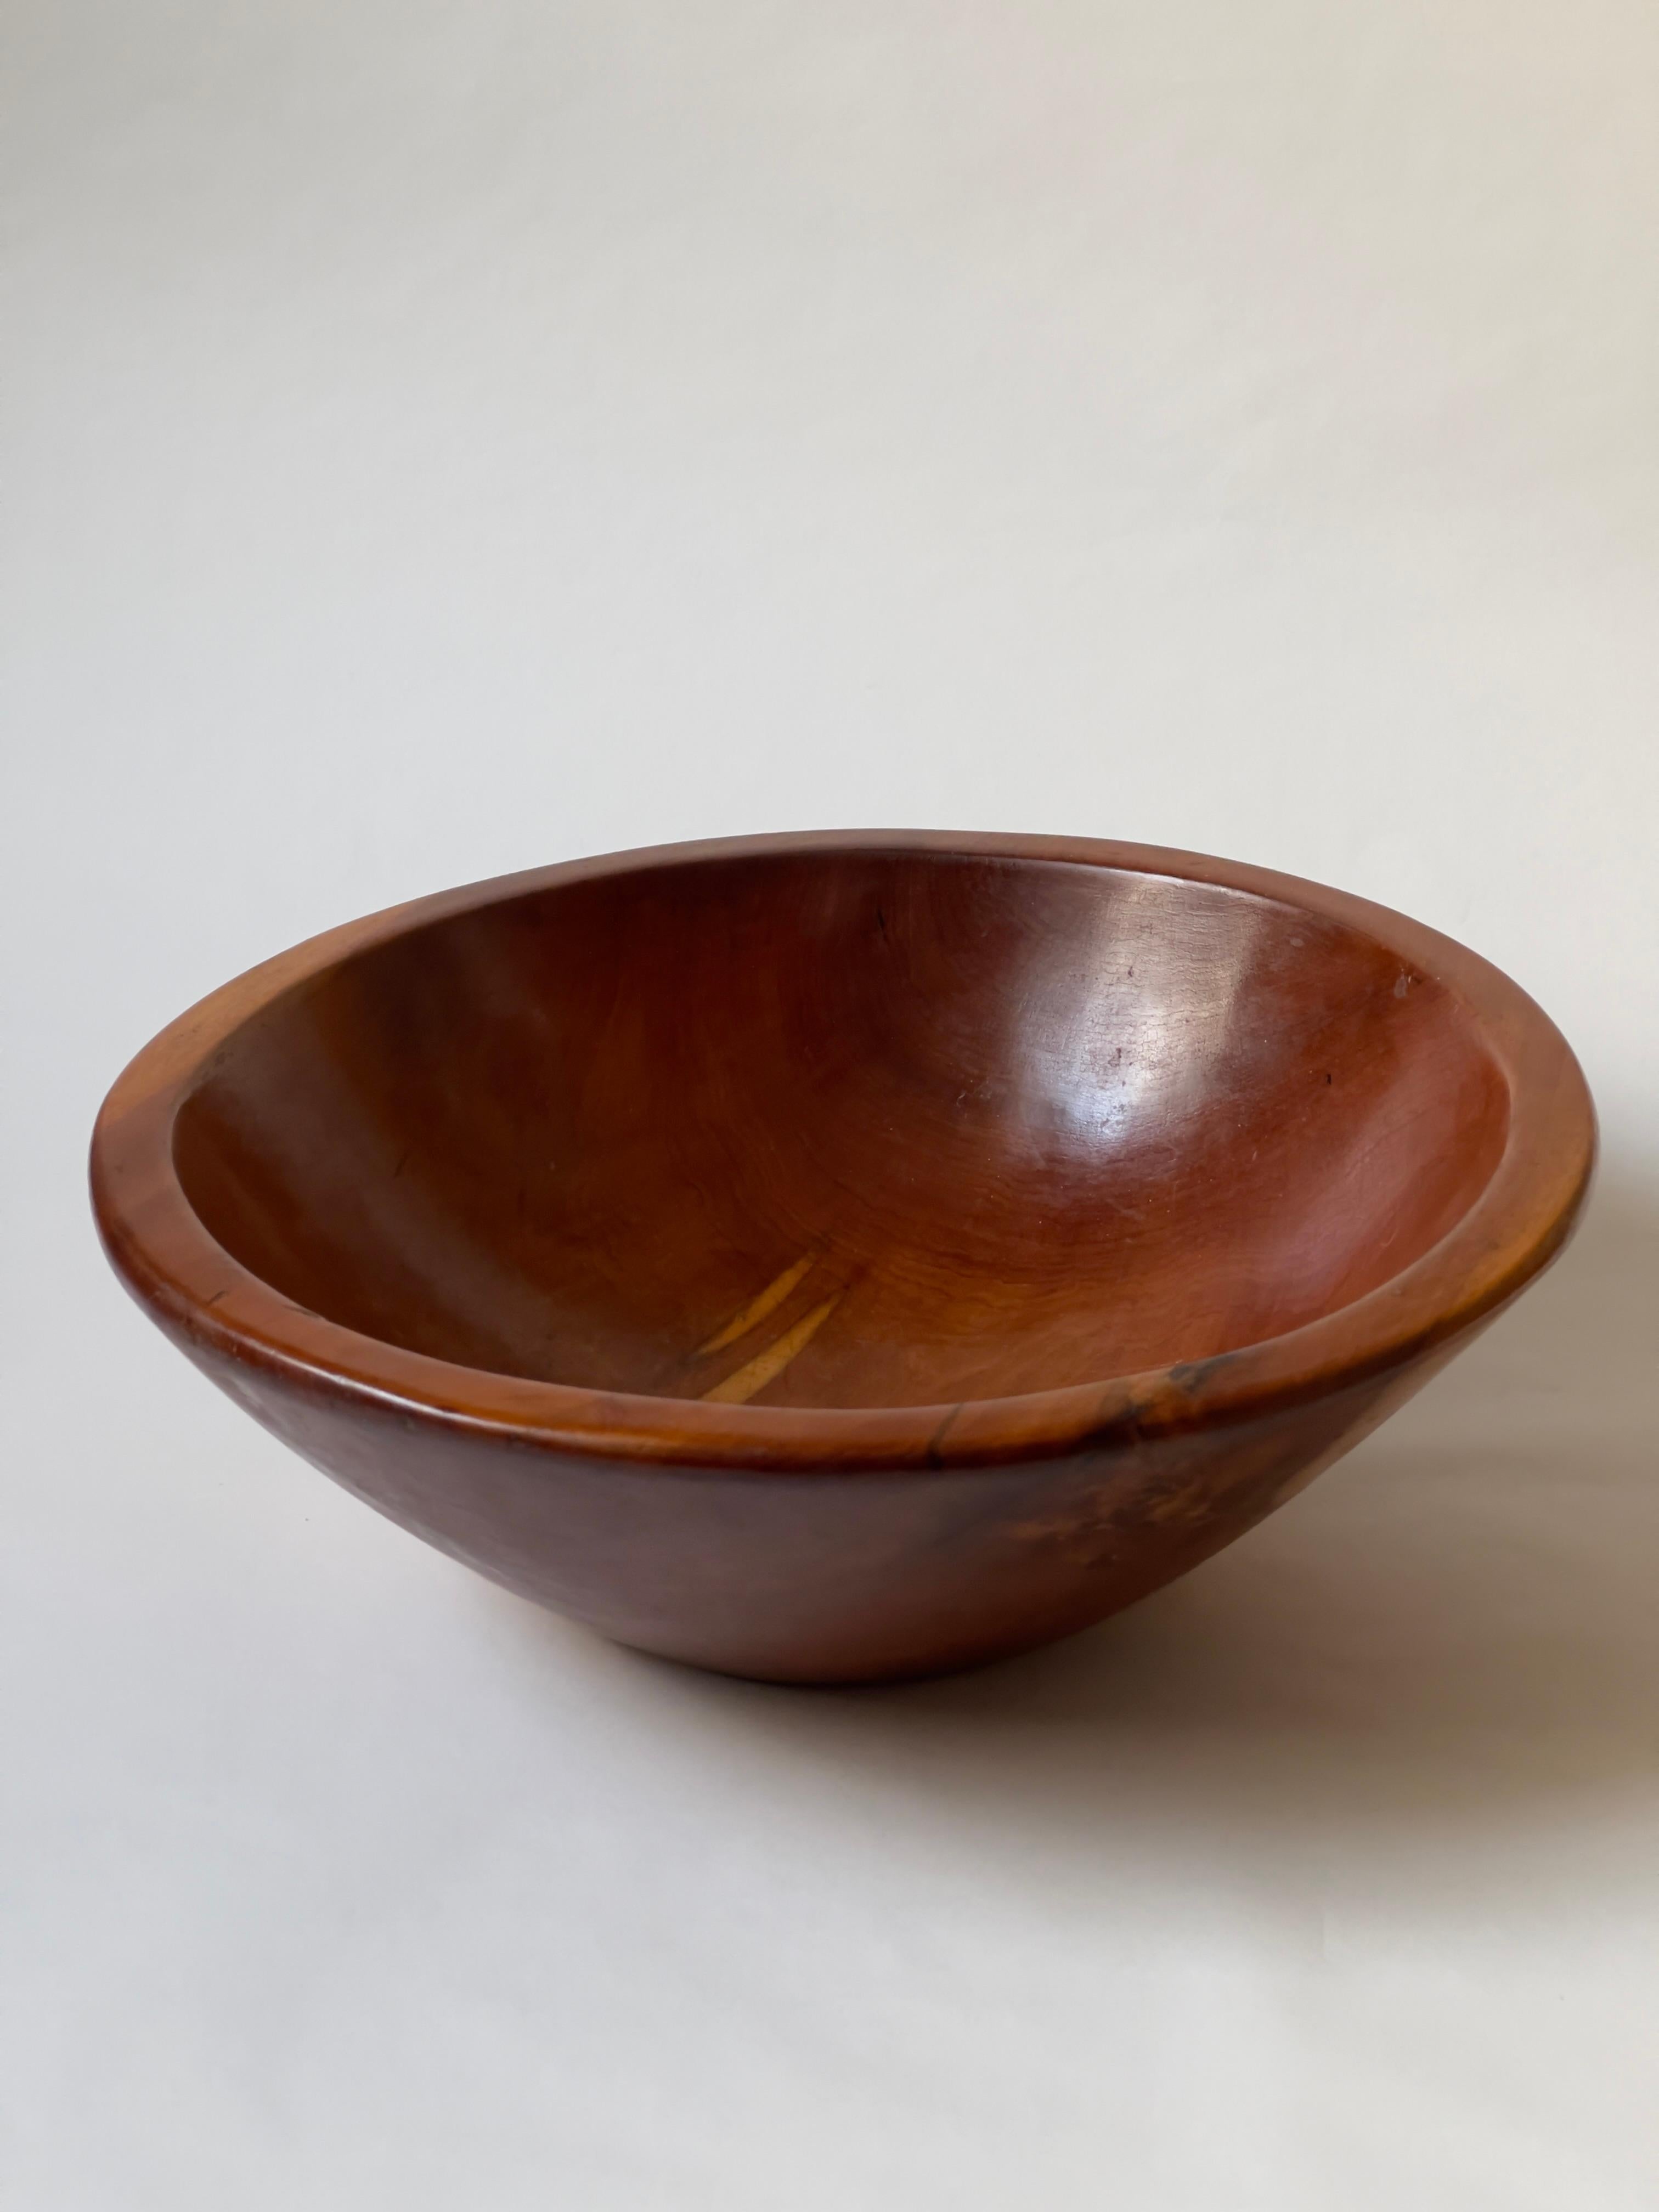 Early 20th century serveware crafted in solid fruit wood by danish woodturner.
Crafted with meticulous care and skill by a Danish woodturner, this serveware represents a harmonious blend of functional design and artistic expression.

The choice of